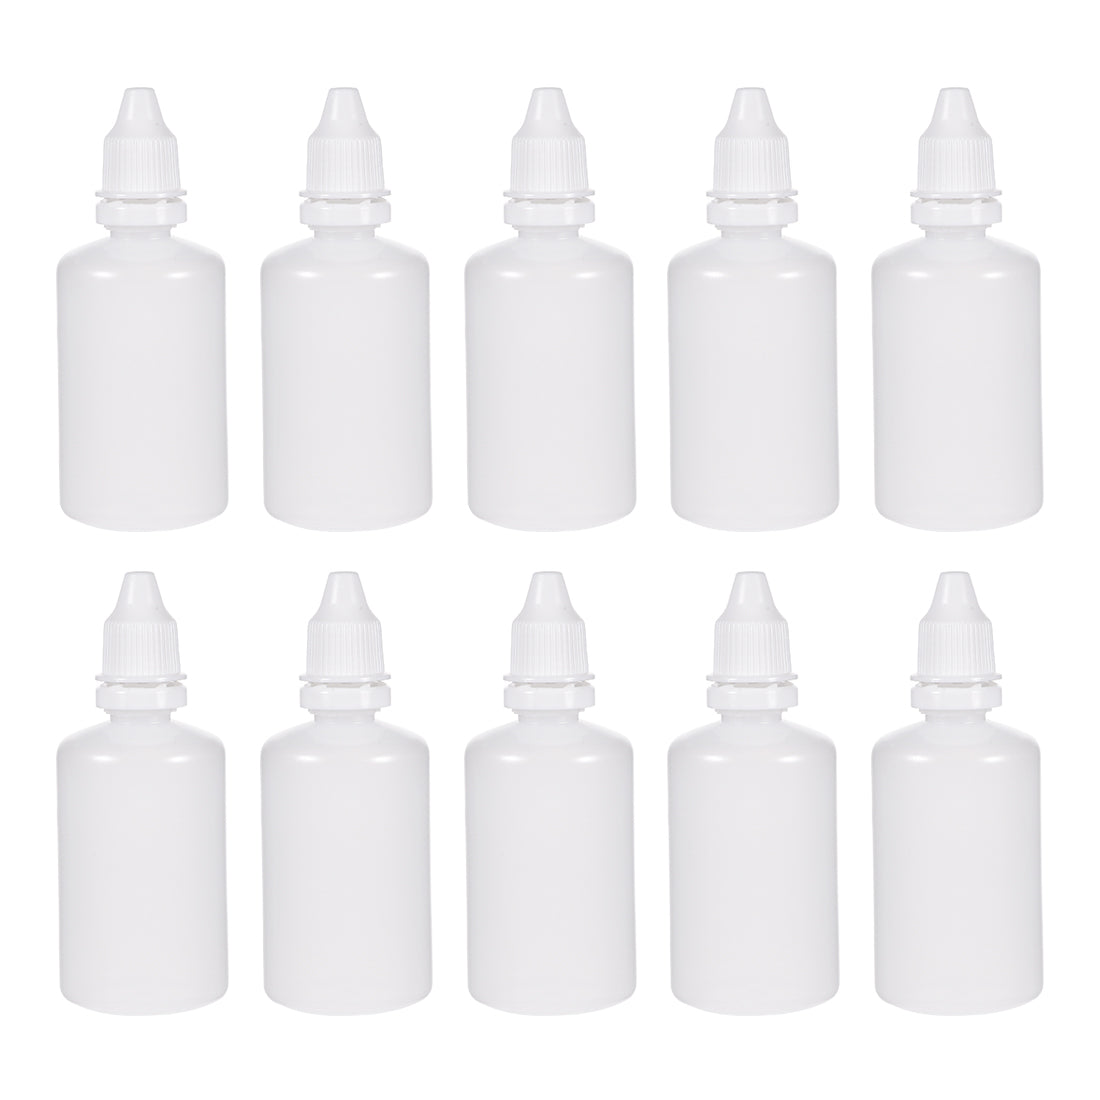 uxcell Uxcell 50ml/1.7 oz Empty Squeezable Dropper Bottle White 20pcs